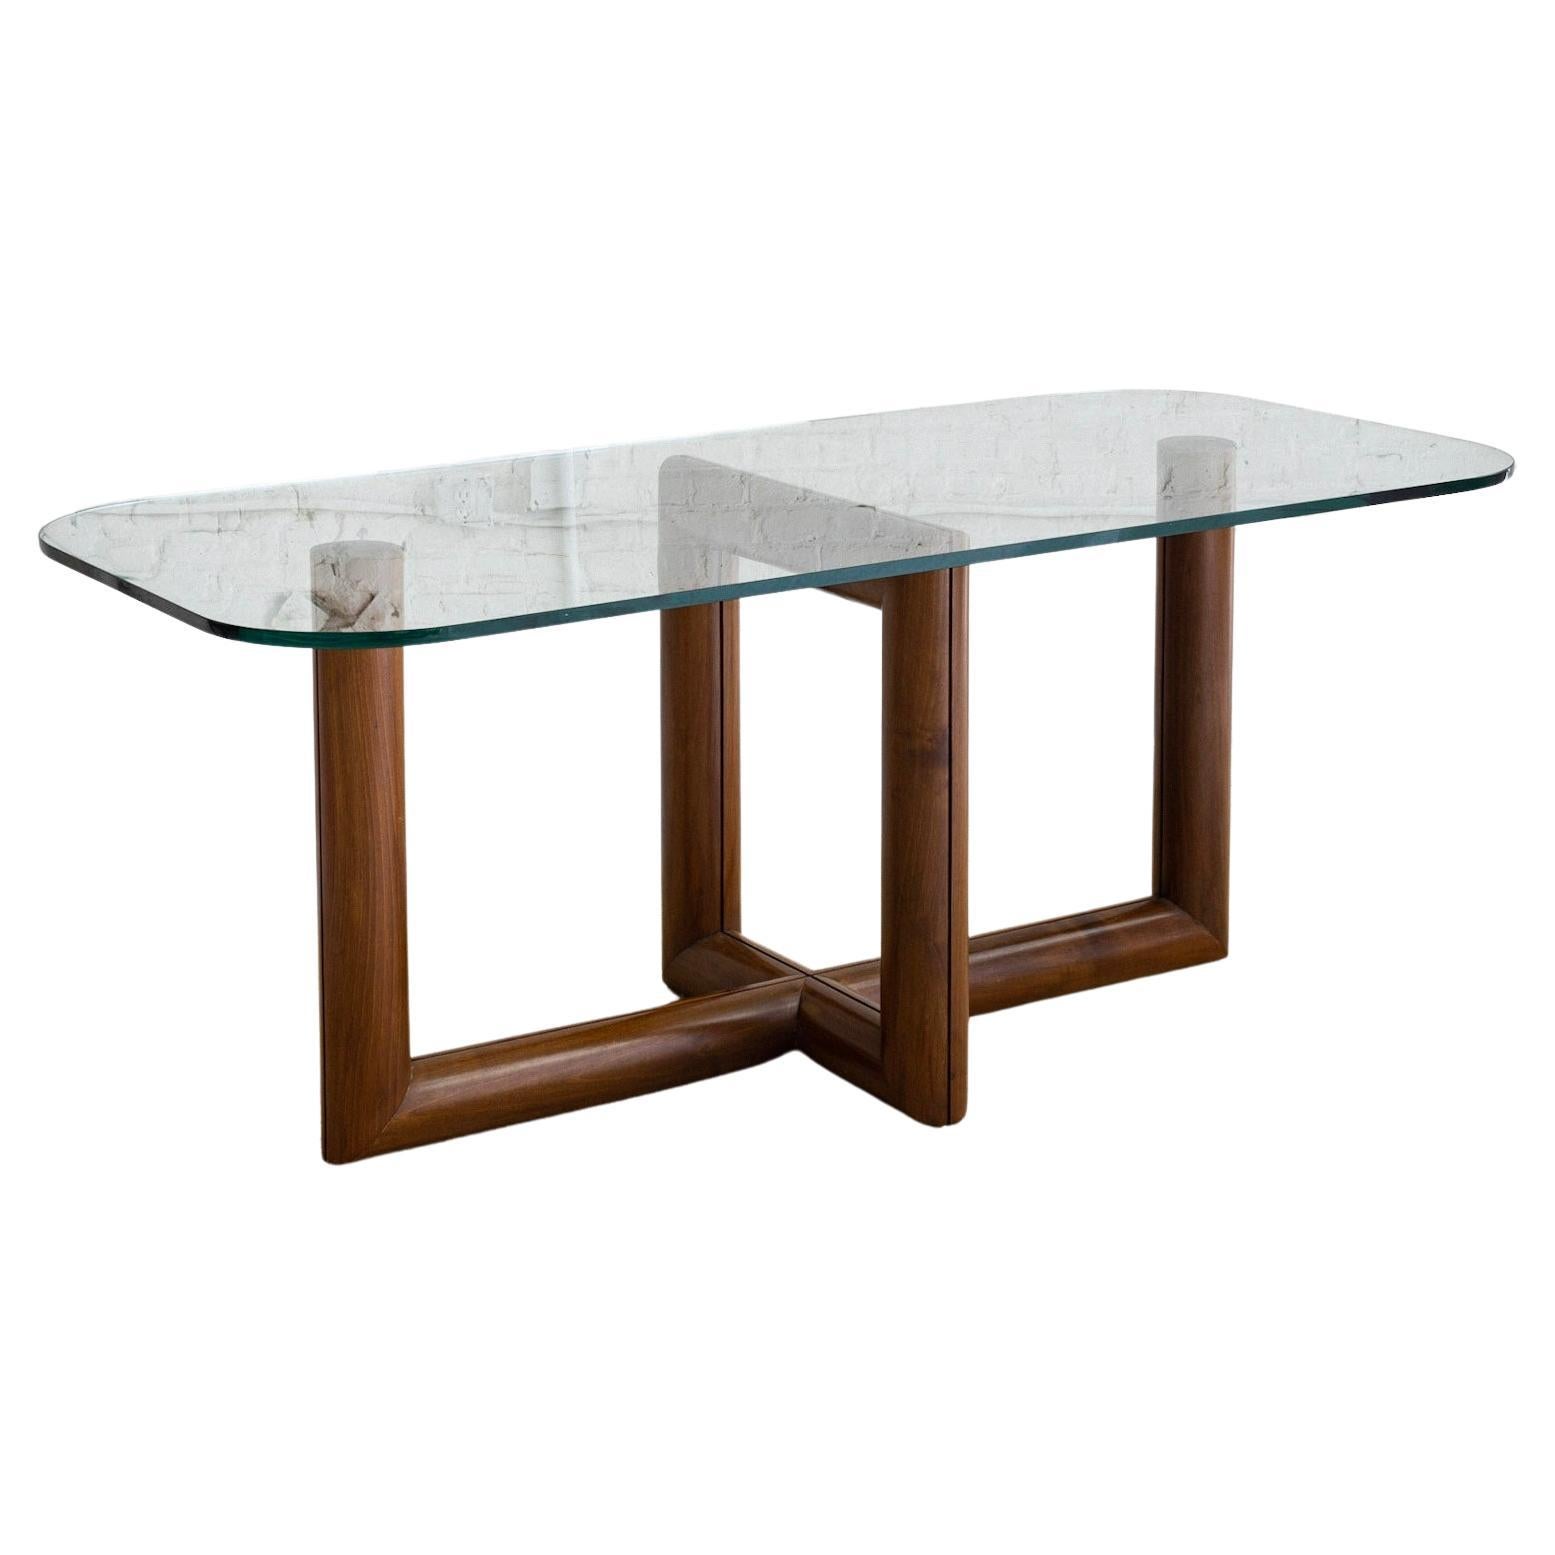 Sculptural Solid Wood Dining Table with Glass Top